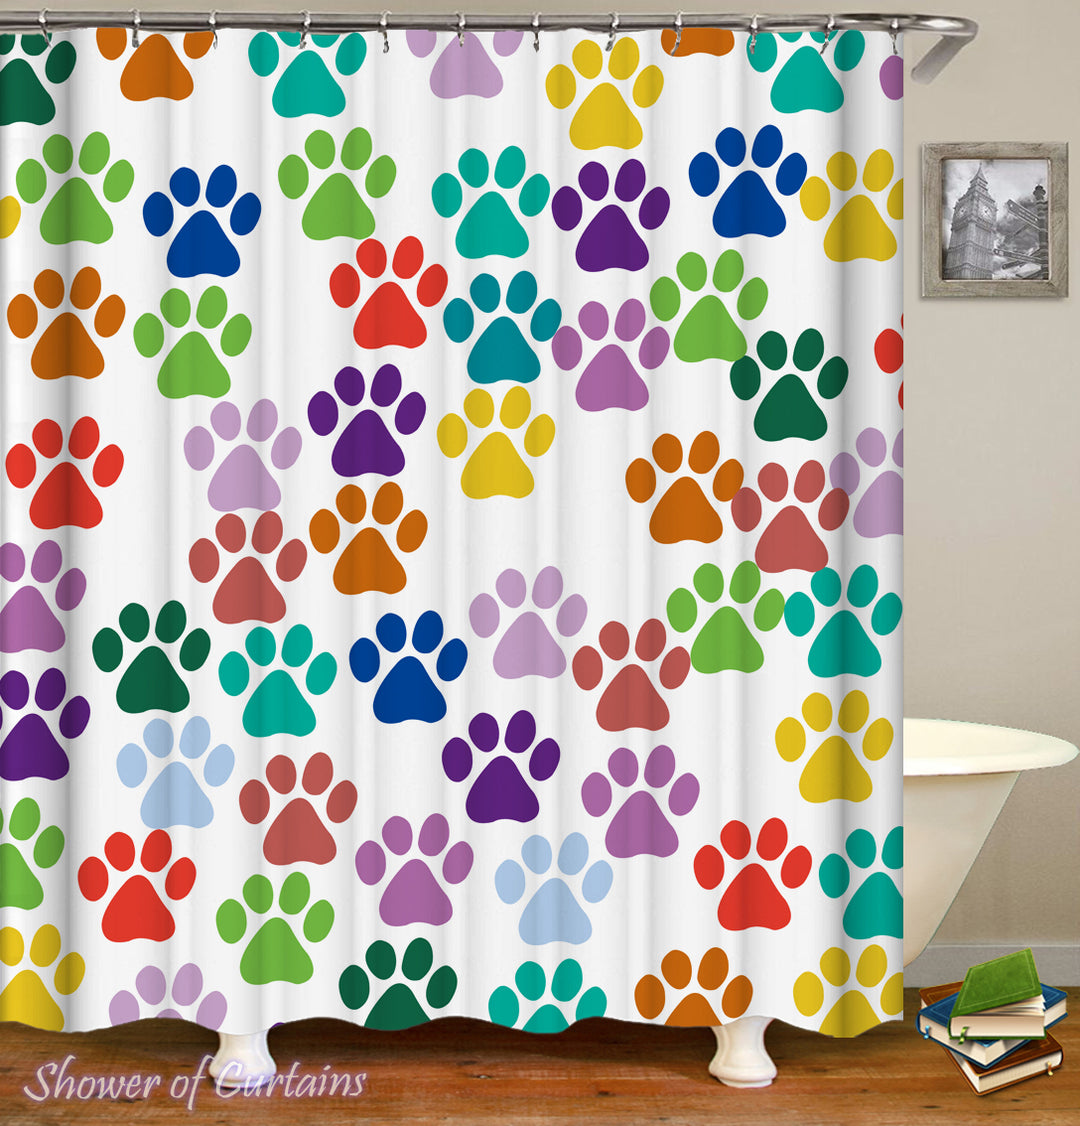 Colorful Dog Paws shower curtain